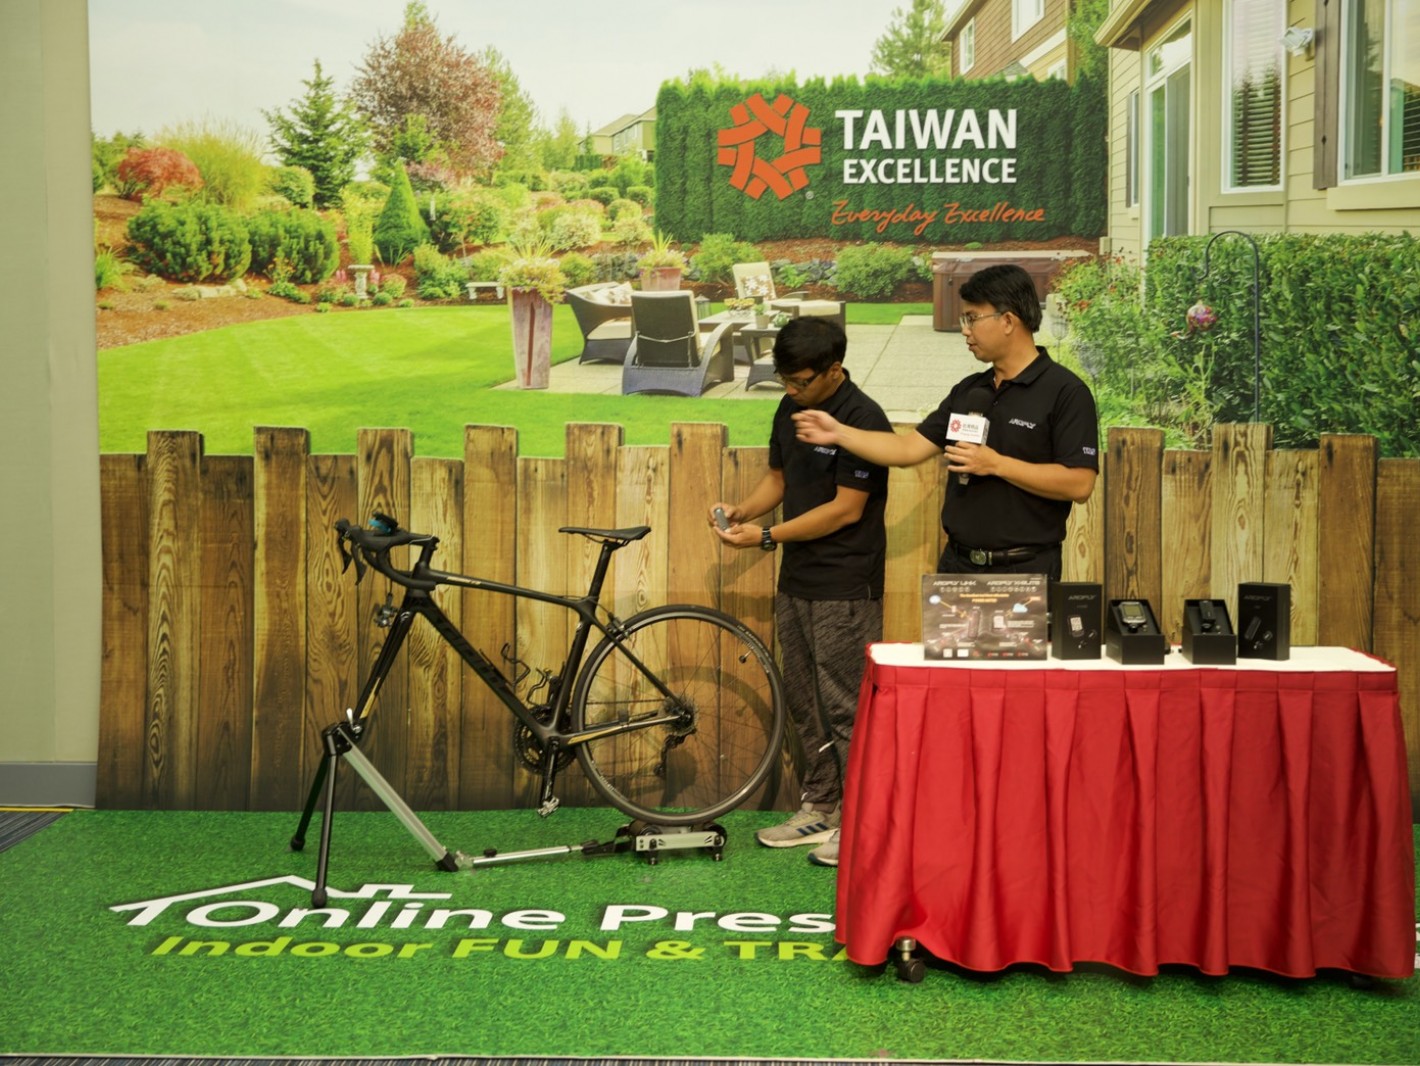 Vice president of TBS Group Corp. demonstrated about how to use the bicycle power meter, LINK